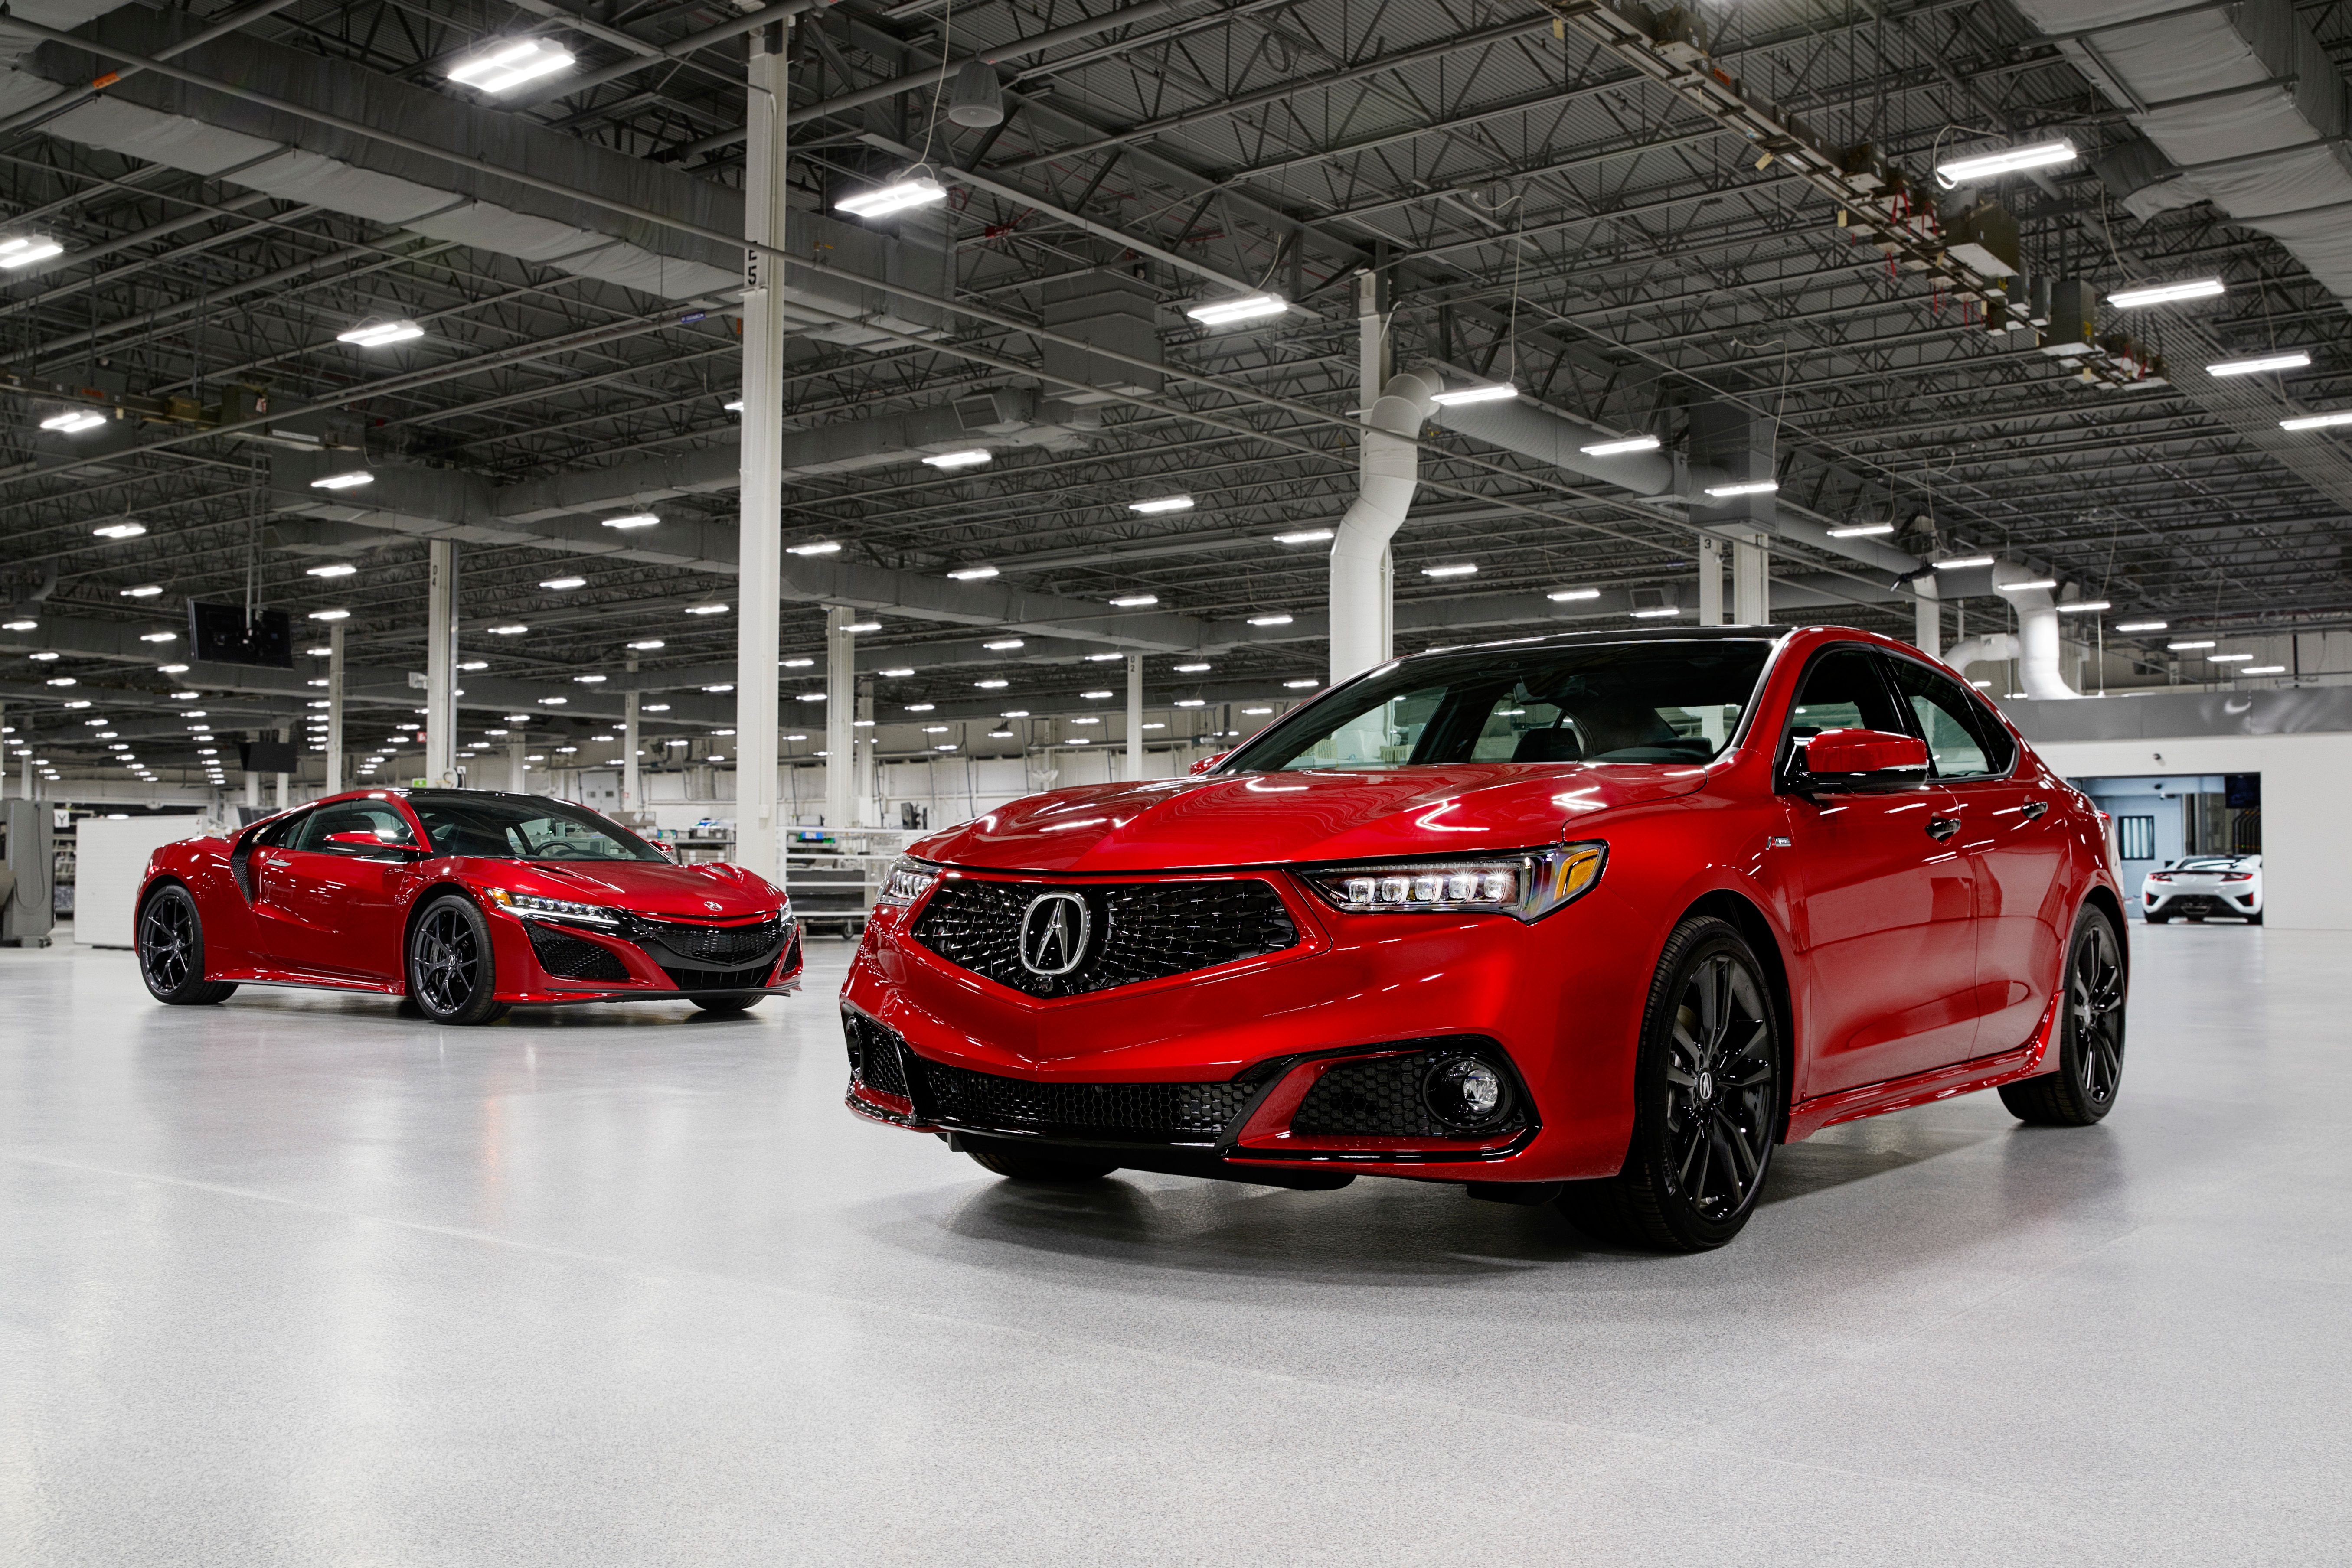 2019 Acura TLX PMC Edition